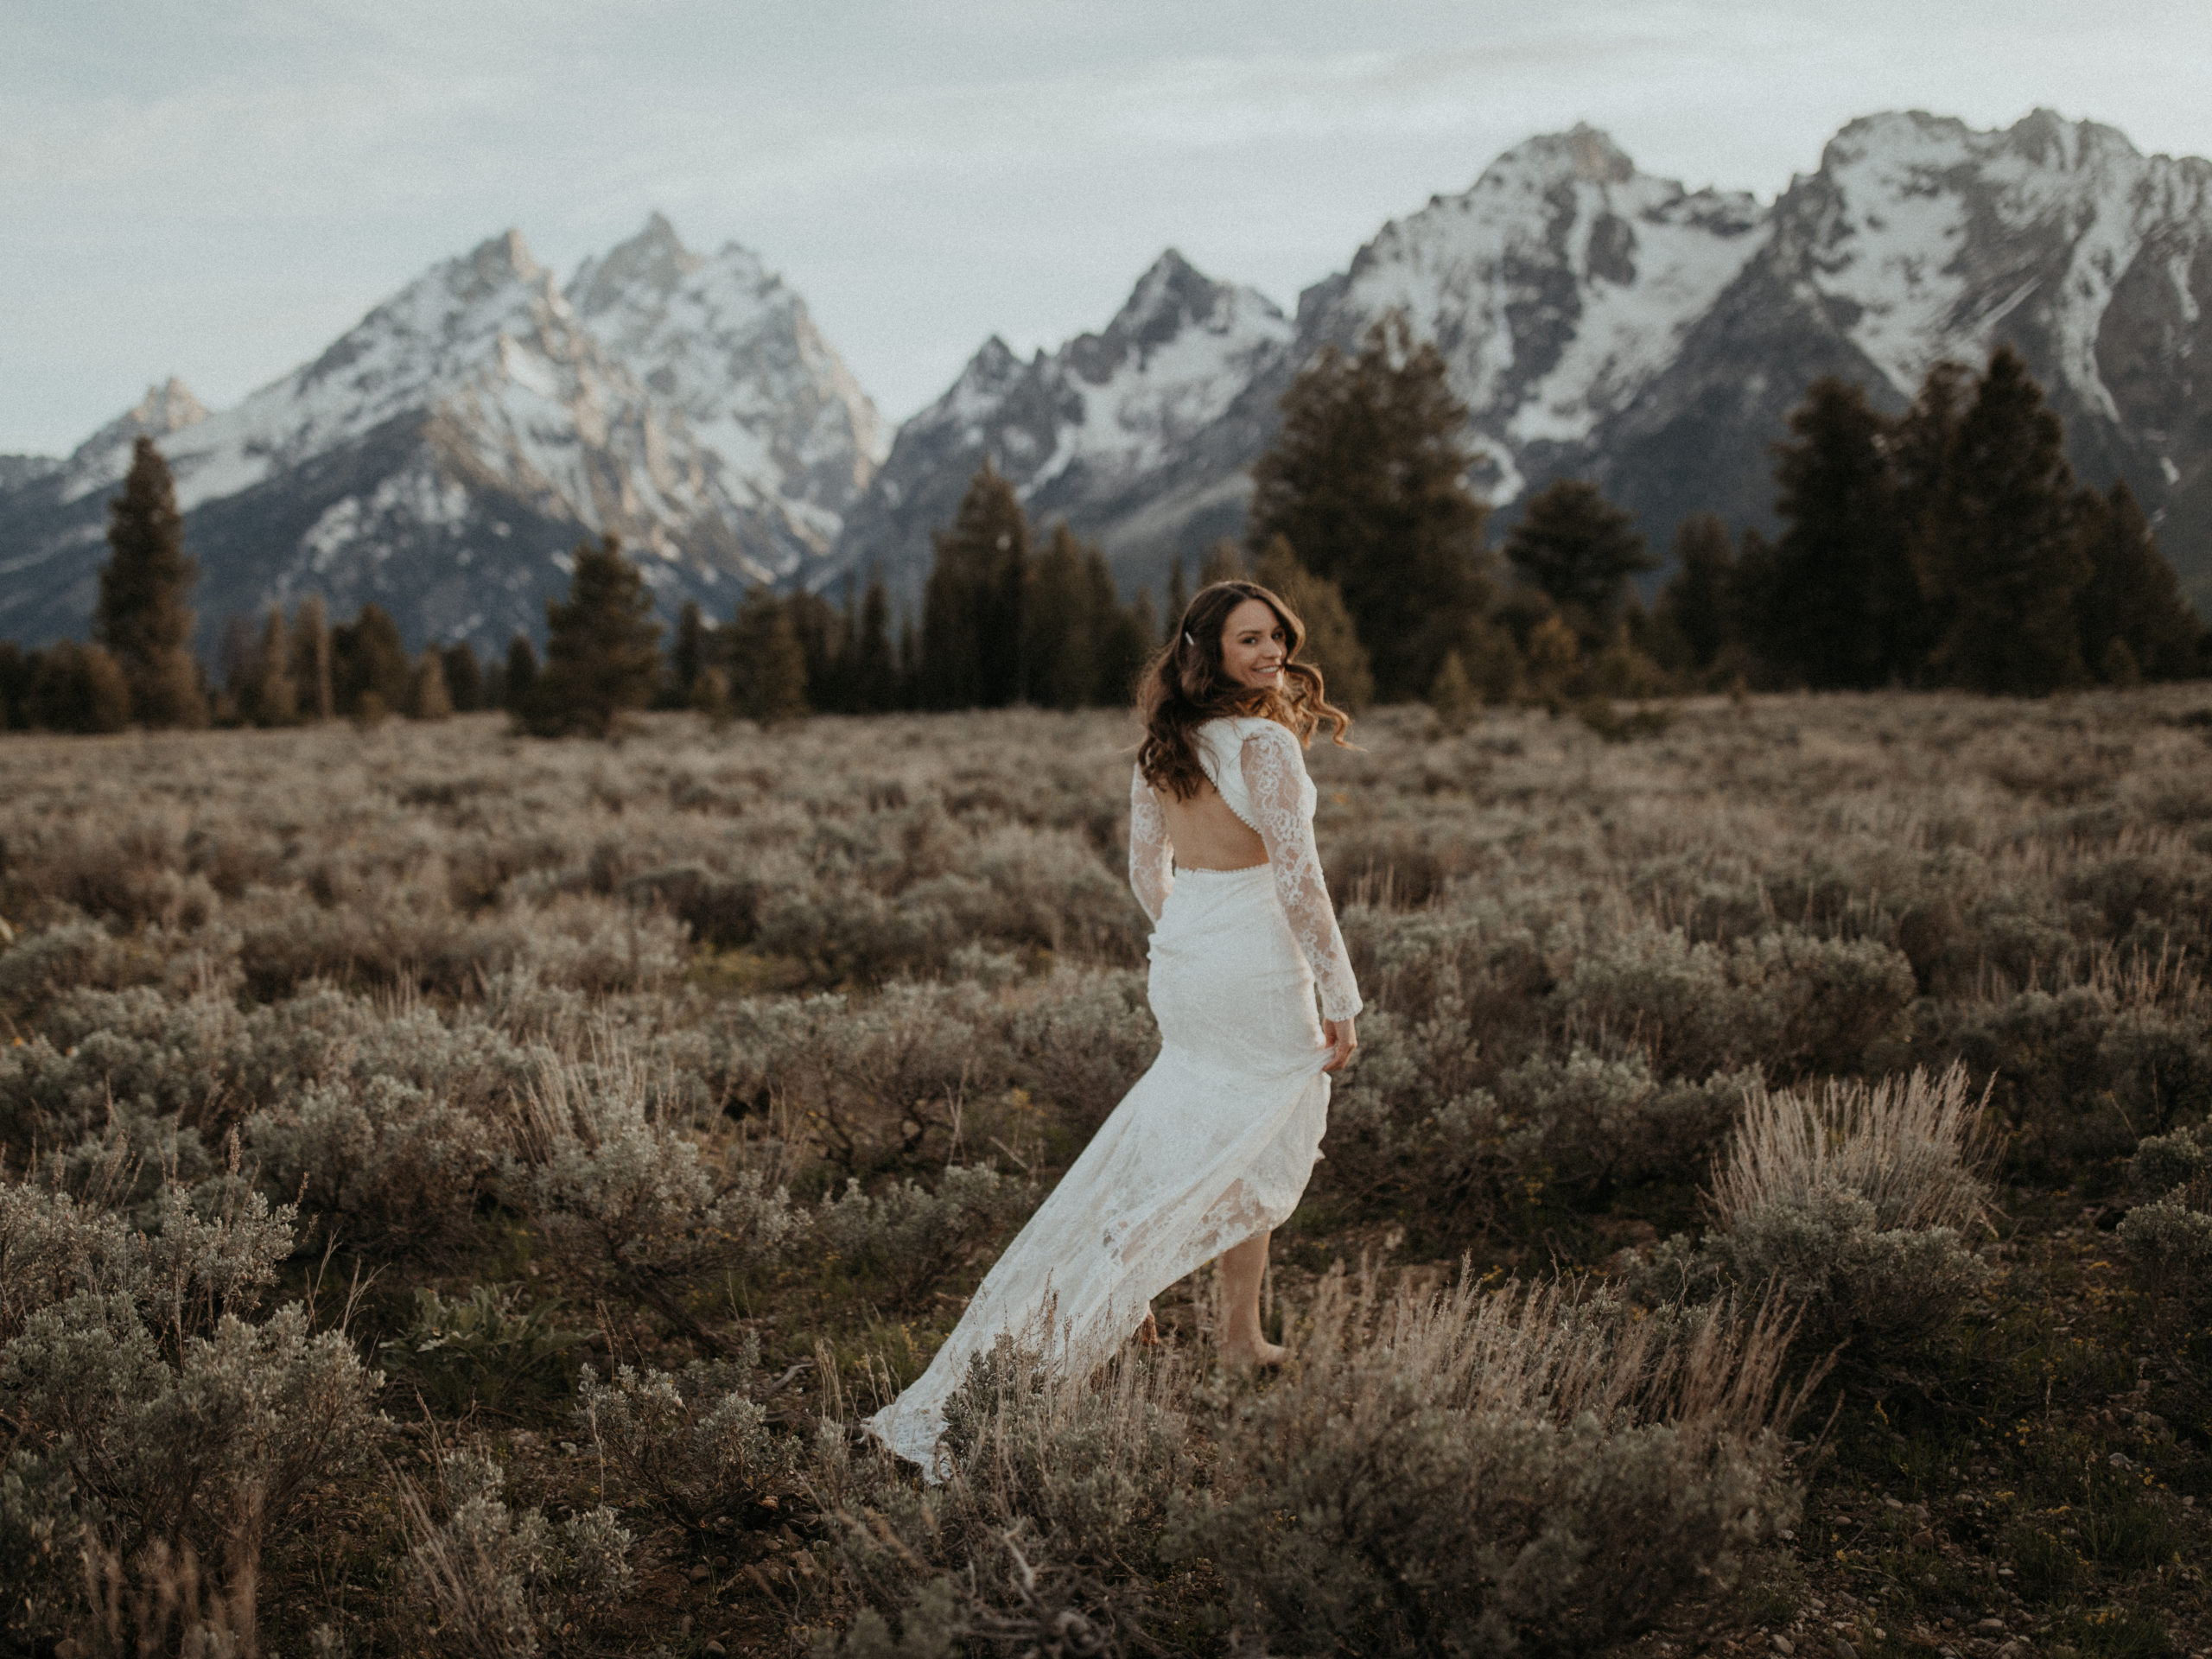 Bride running barefoot at sunset in the Grand Tetons National Park